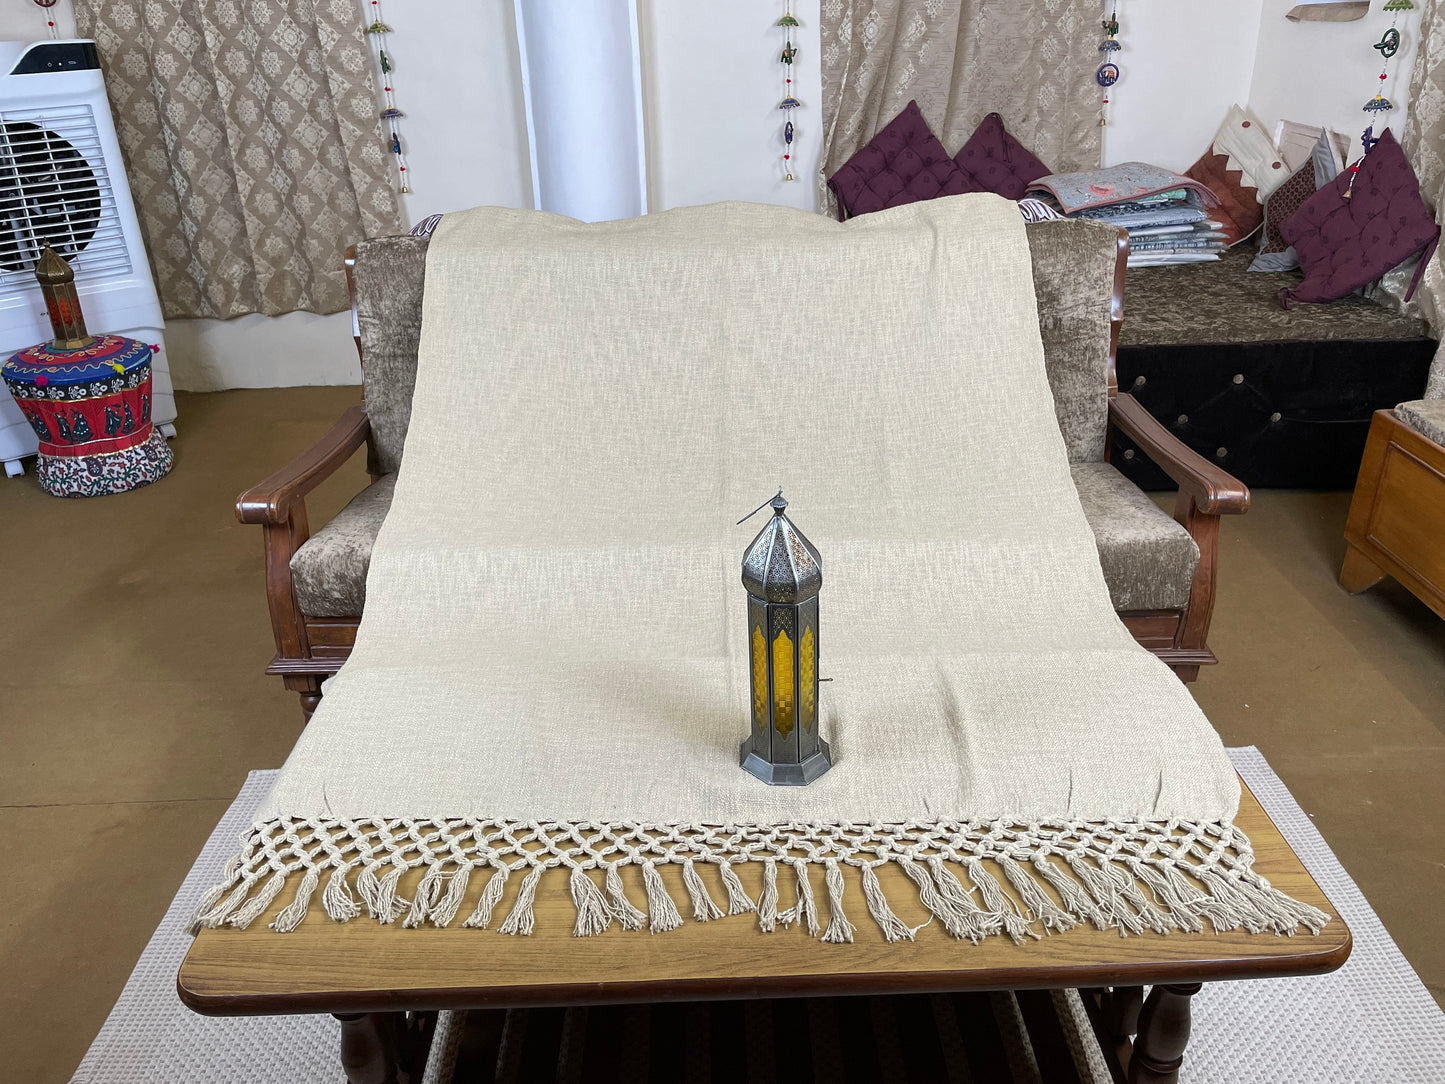 Indian Handmade Beige Throw Blanket for Couch/Sofa, 51×80 Inch Woven Blanket for Bedroom Living Room, Home Decor, Housewarming Gift